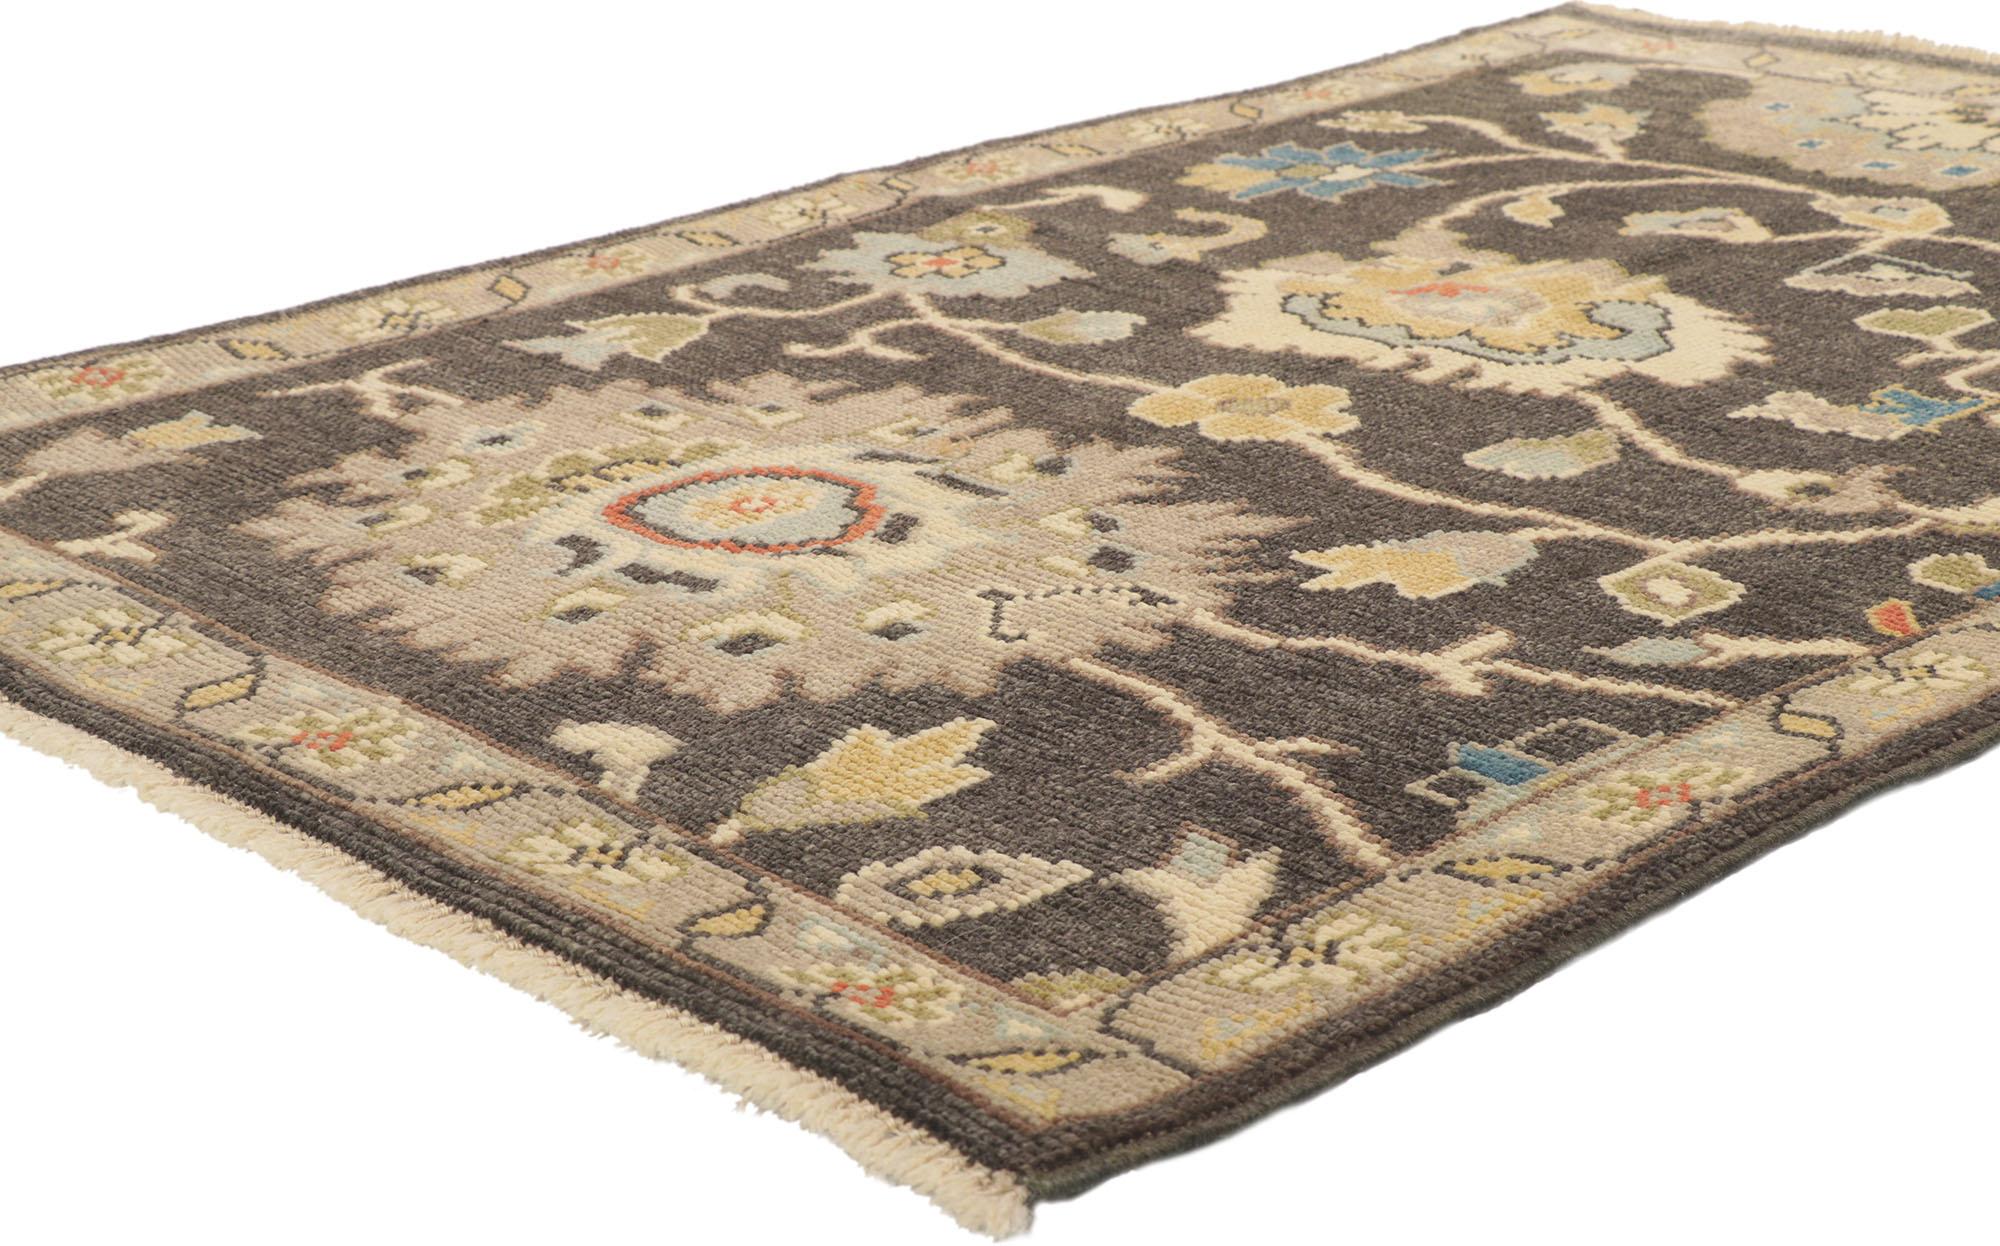 80688 New Contemporary Oushak rug with Modern Style 04'00 x 06'00. With its timeless design and sophisticated elegance, this hand-knotted wool small Oushak rug beautifully embodies a modern style. The abrashed brownish-charcoal hued field features a